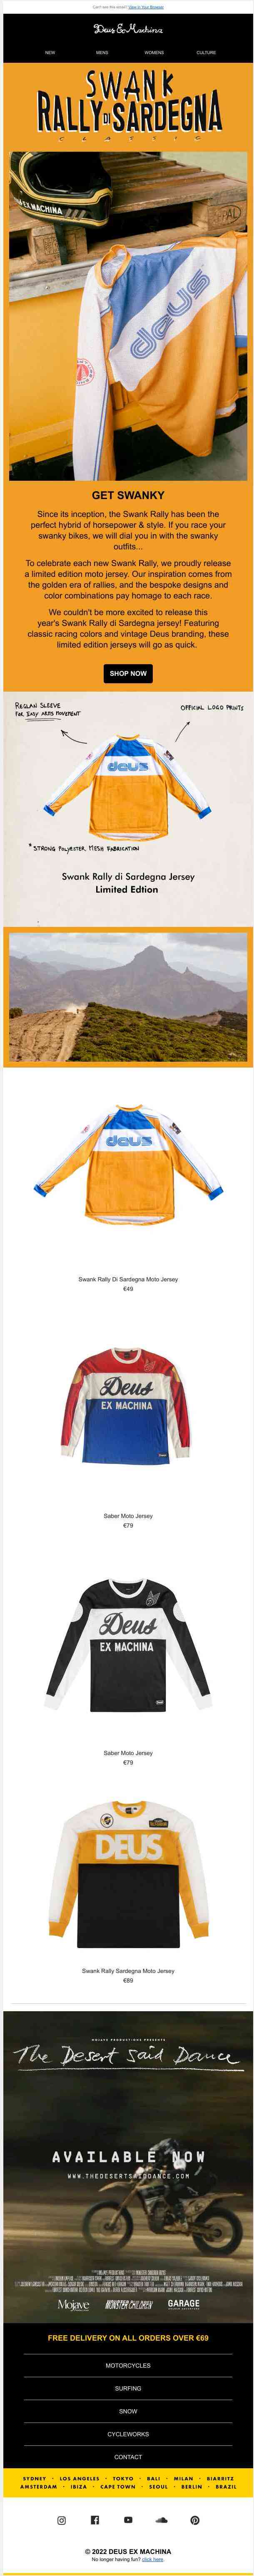 SWANK RALLY - LIMITED EDITION MOTO JERSEY